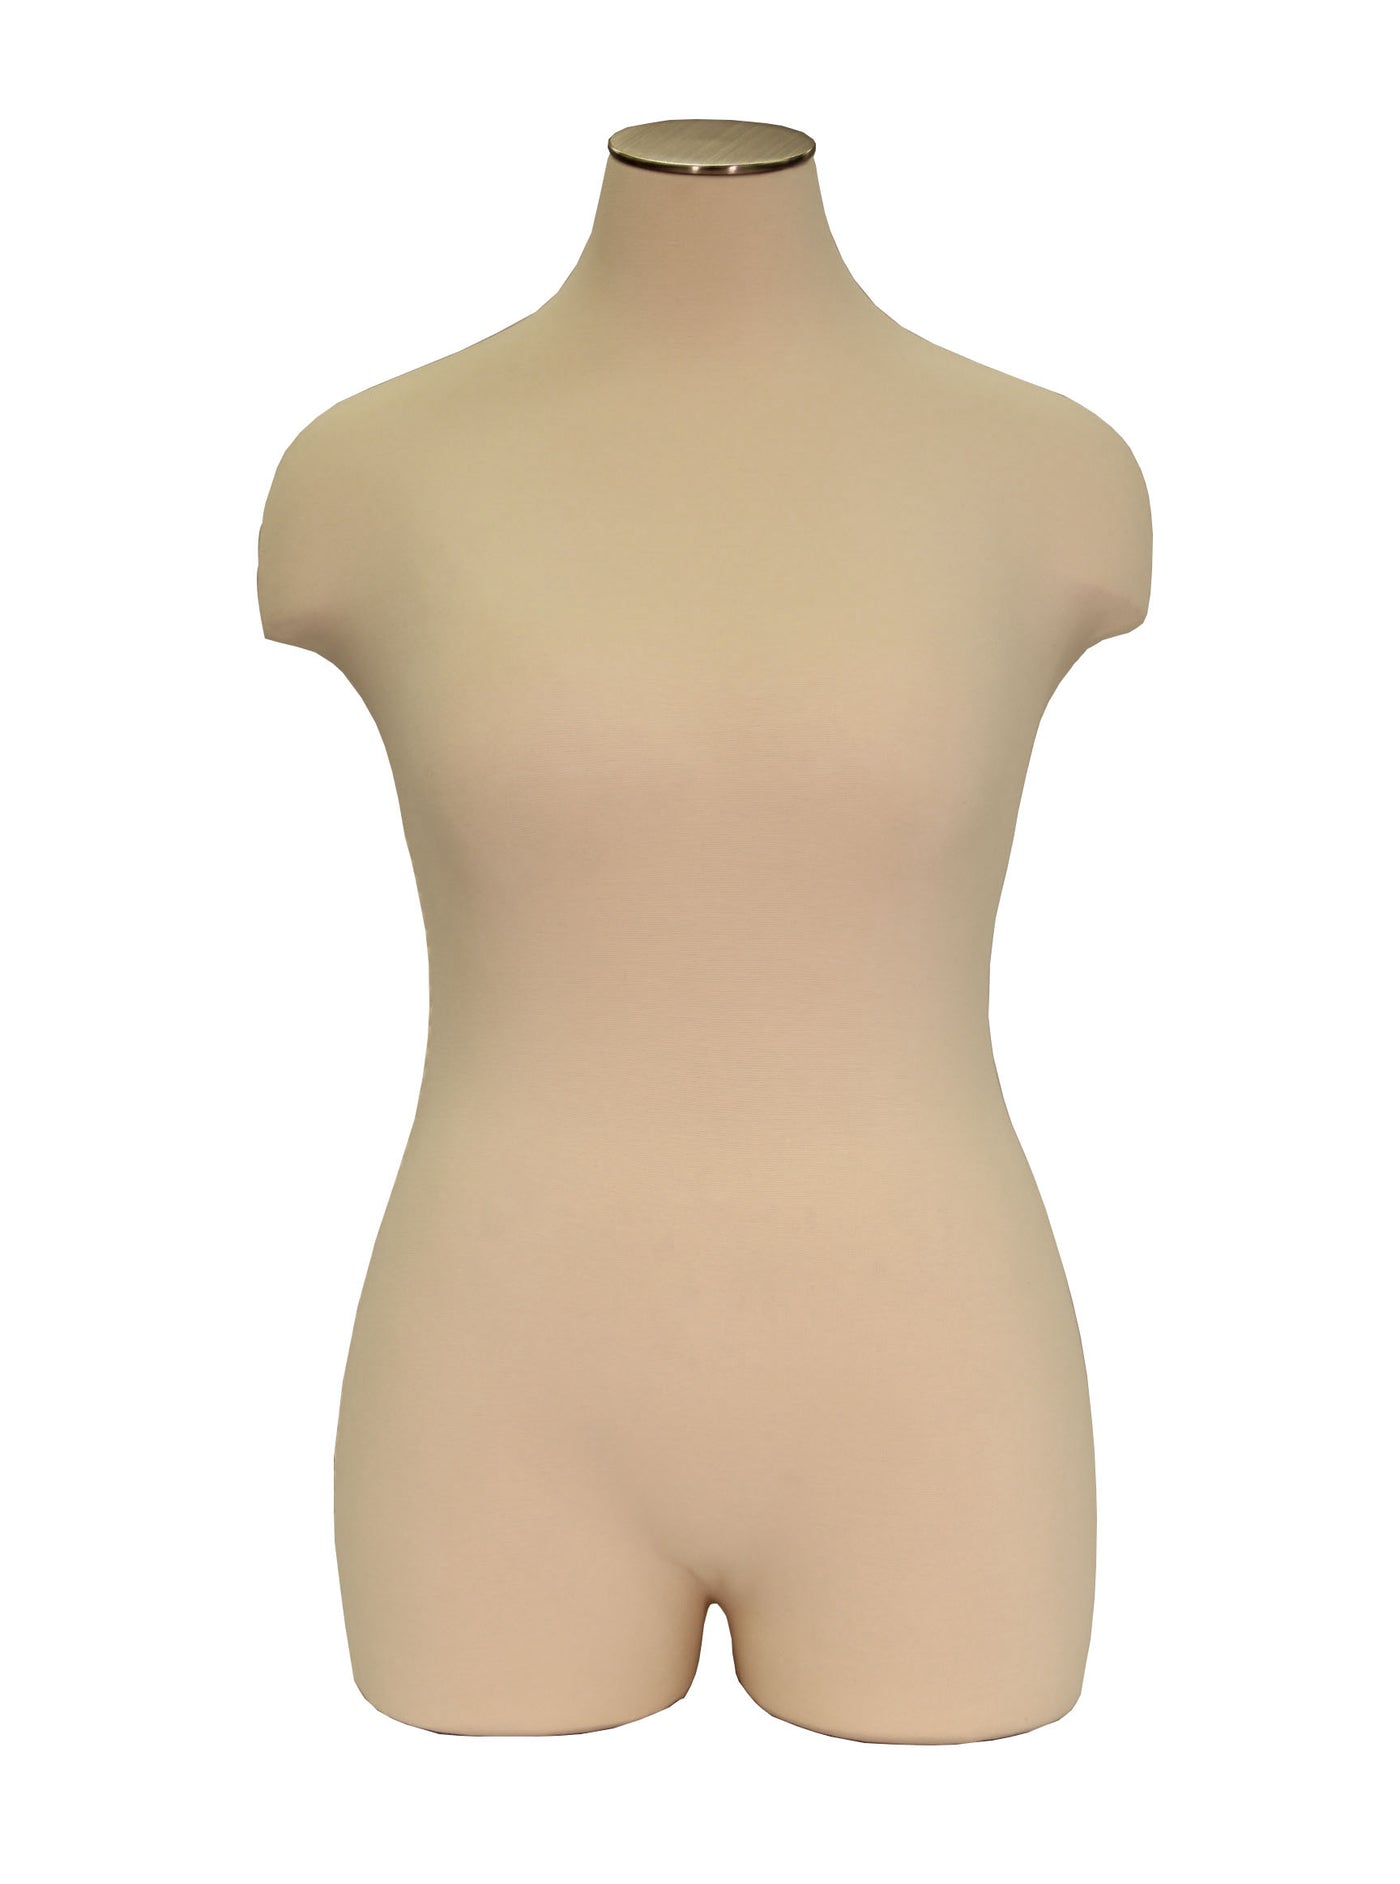 Plus Size Female Dress Form with Partial Leg (without base)